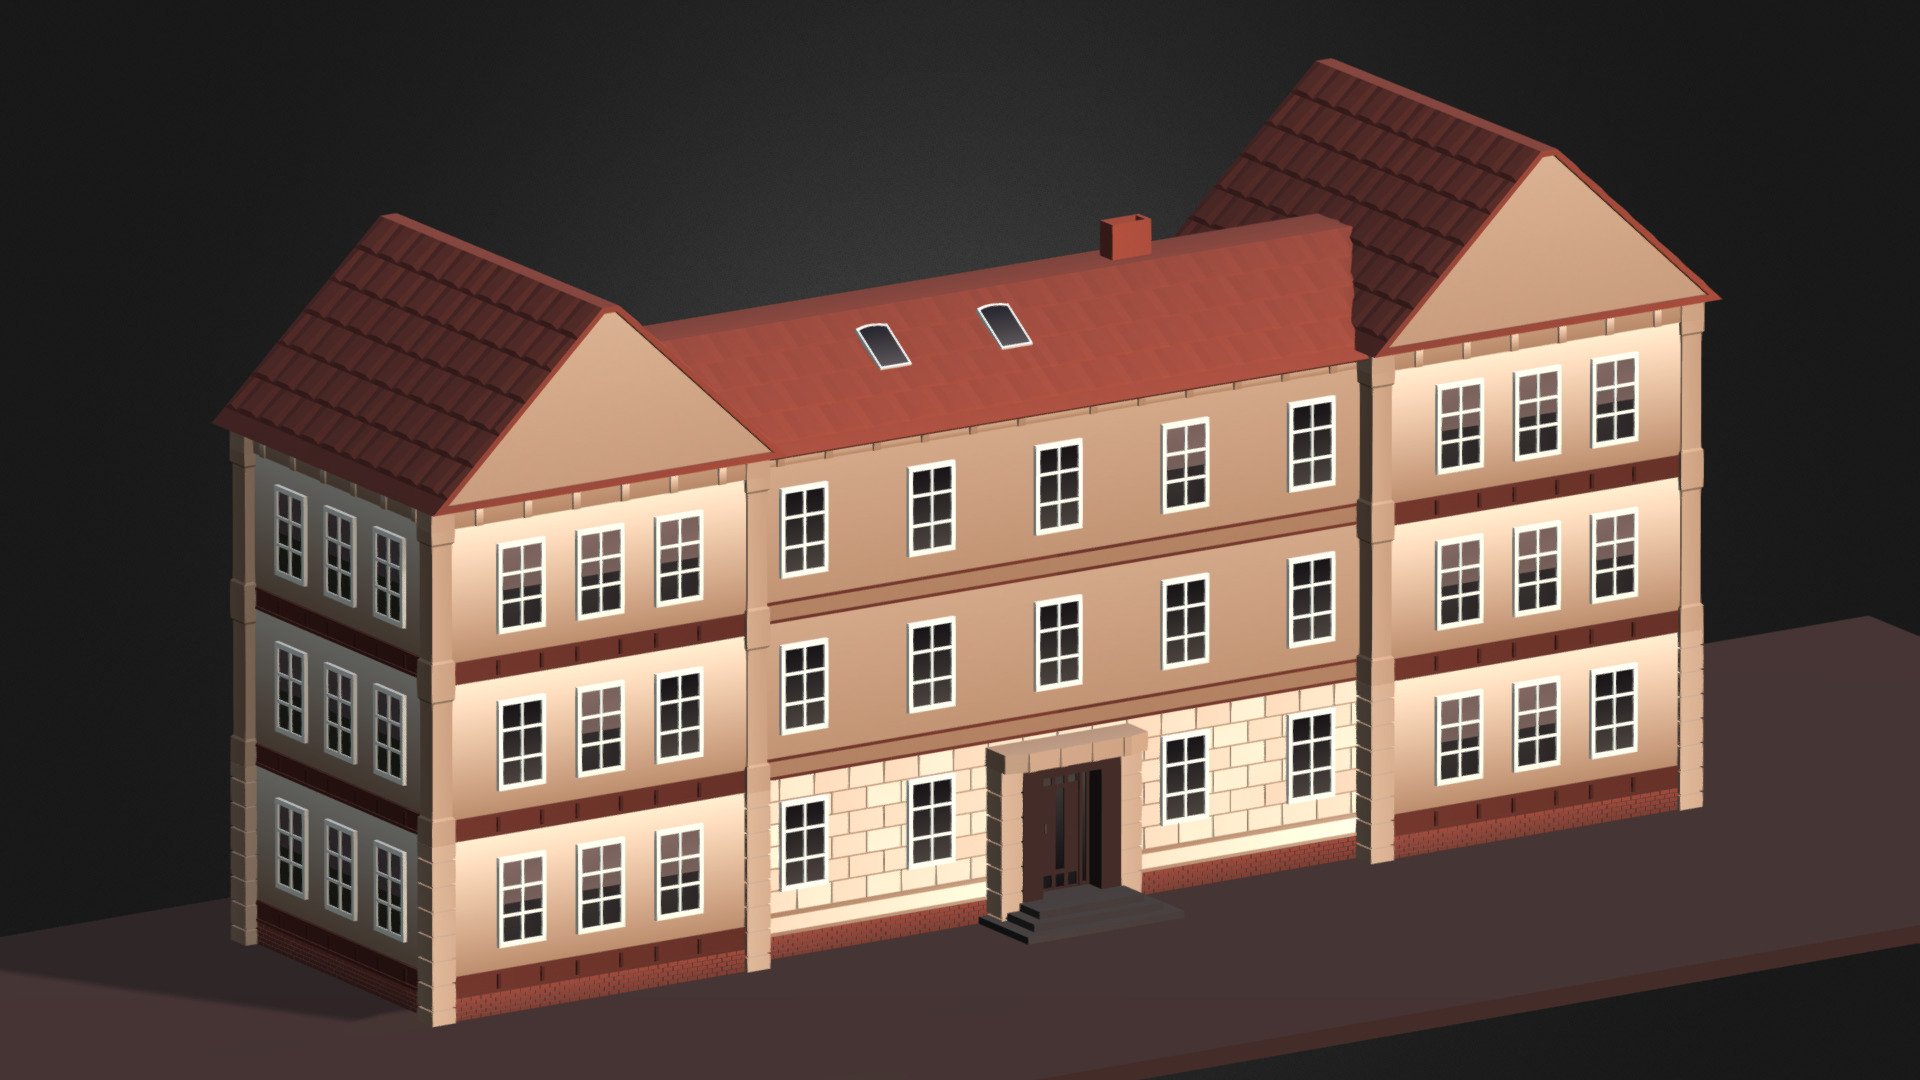 Modular building made in Blender. Scene contains example building and modules arranged on grid (see annotations).

Full package contains Blender and FBX files 3d model